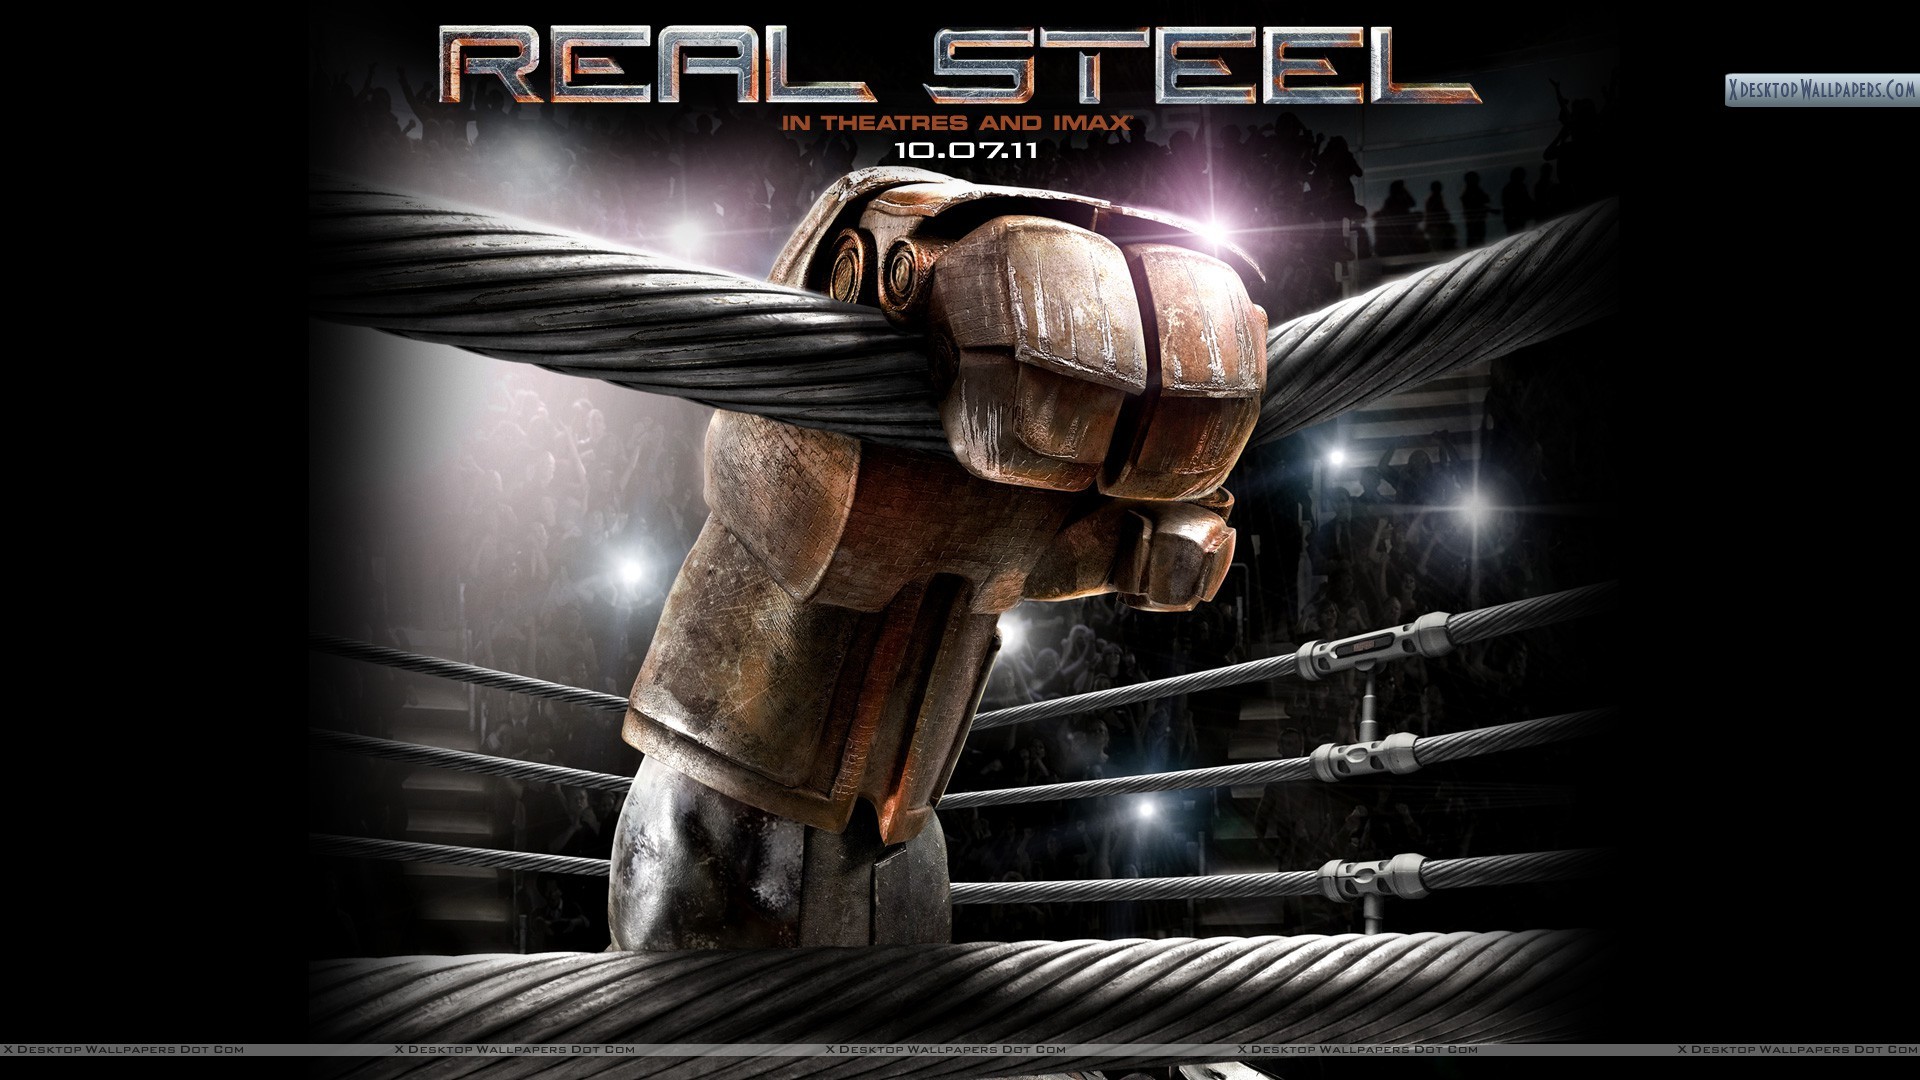 1920x1080 You are viewing wallpaper titled "Real Steel ...